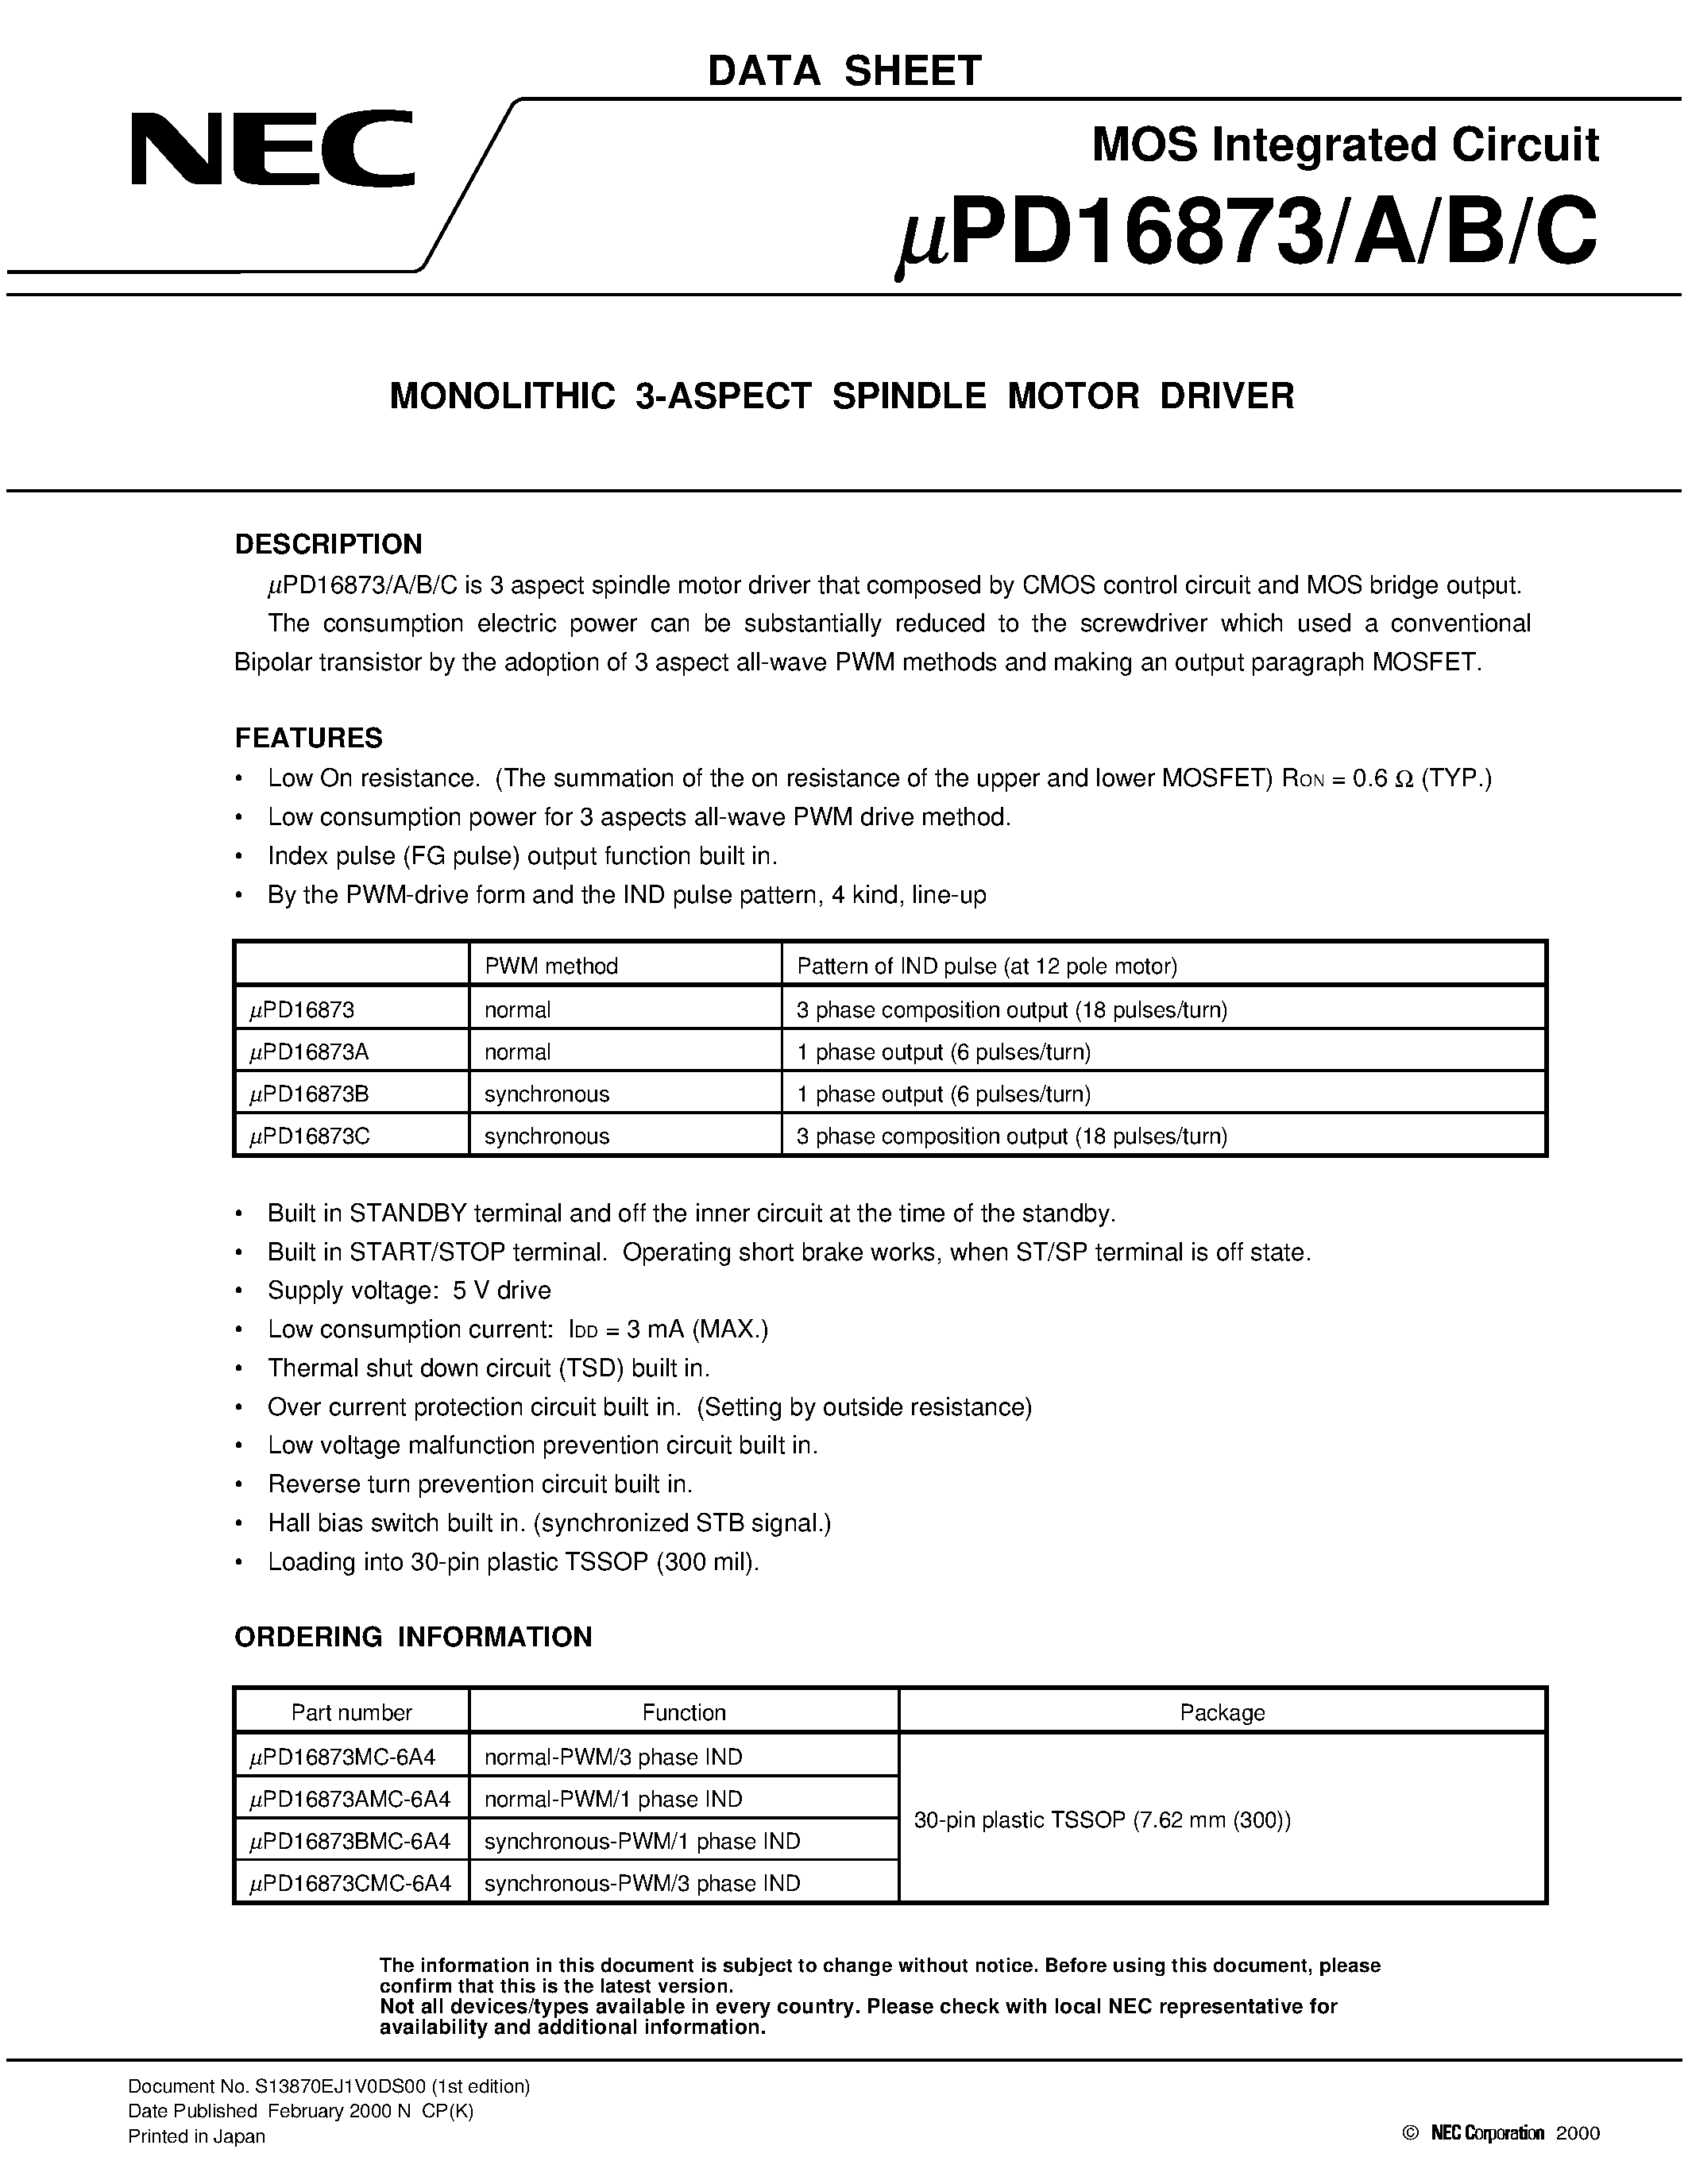 Datasheet UPD16873BMC-6A4 - MONOLITHIC 3-ASPECT SPINDLE MOTOR DRIVER page 1